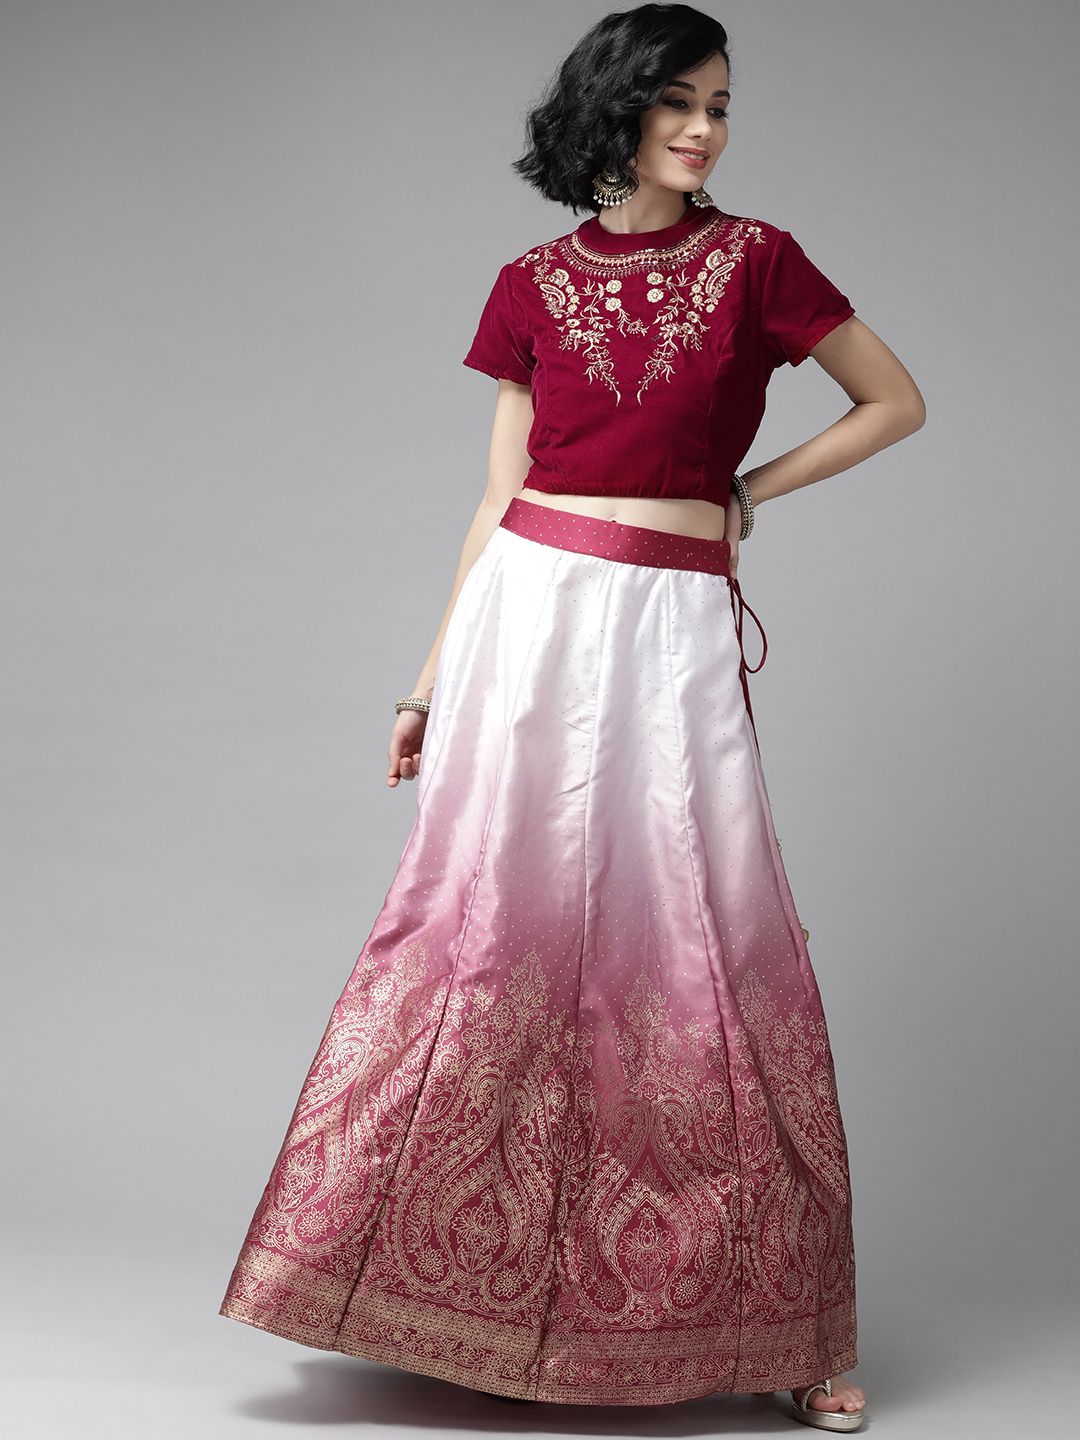 Juniper Burgundy & Maroon Ready to Wear Lehenga with Blouse Price in India